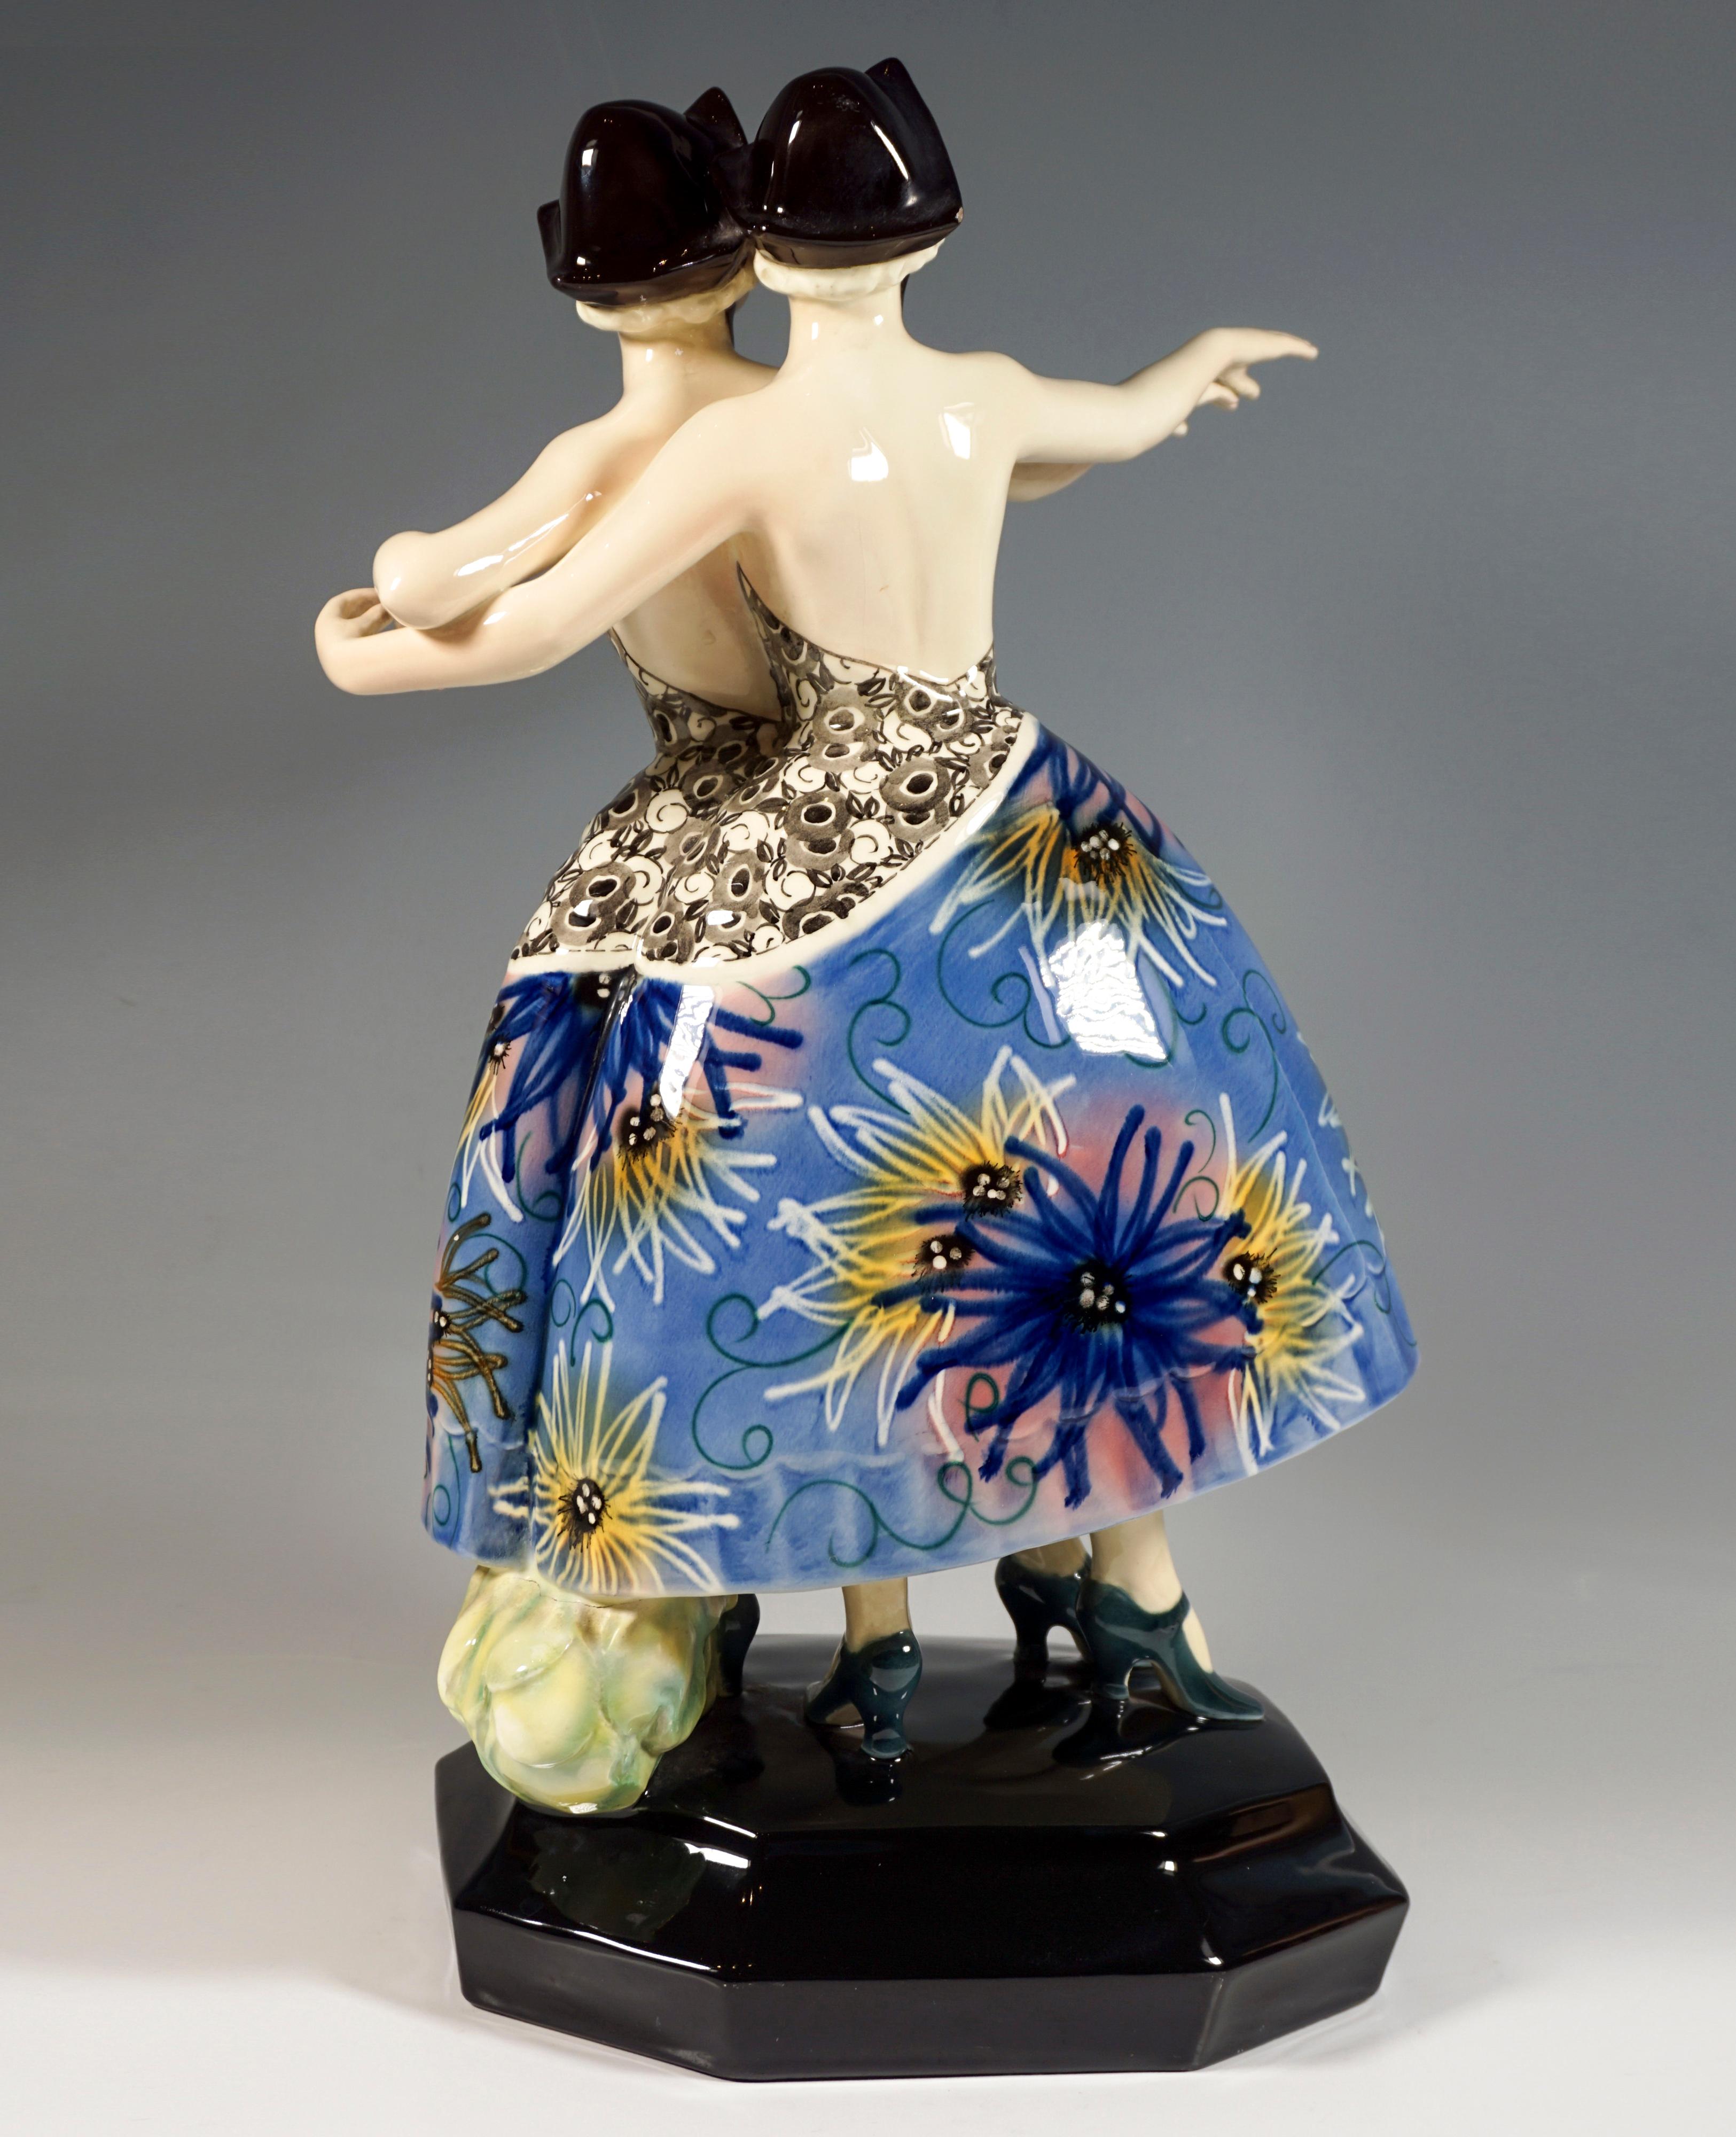 Hand-Crafted  Goldscheider Art Déco Group 'Twin Dancers in Phantasy Costume', Lorenzl ca 1926 For Sale